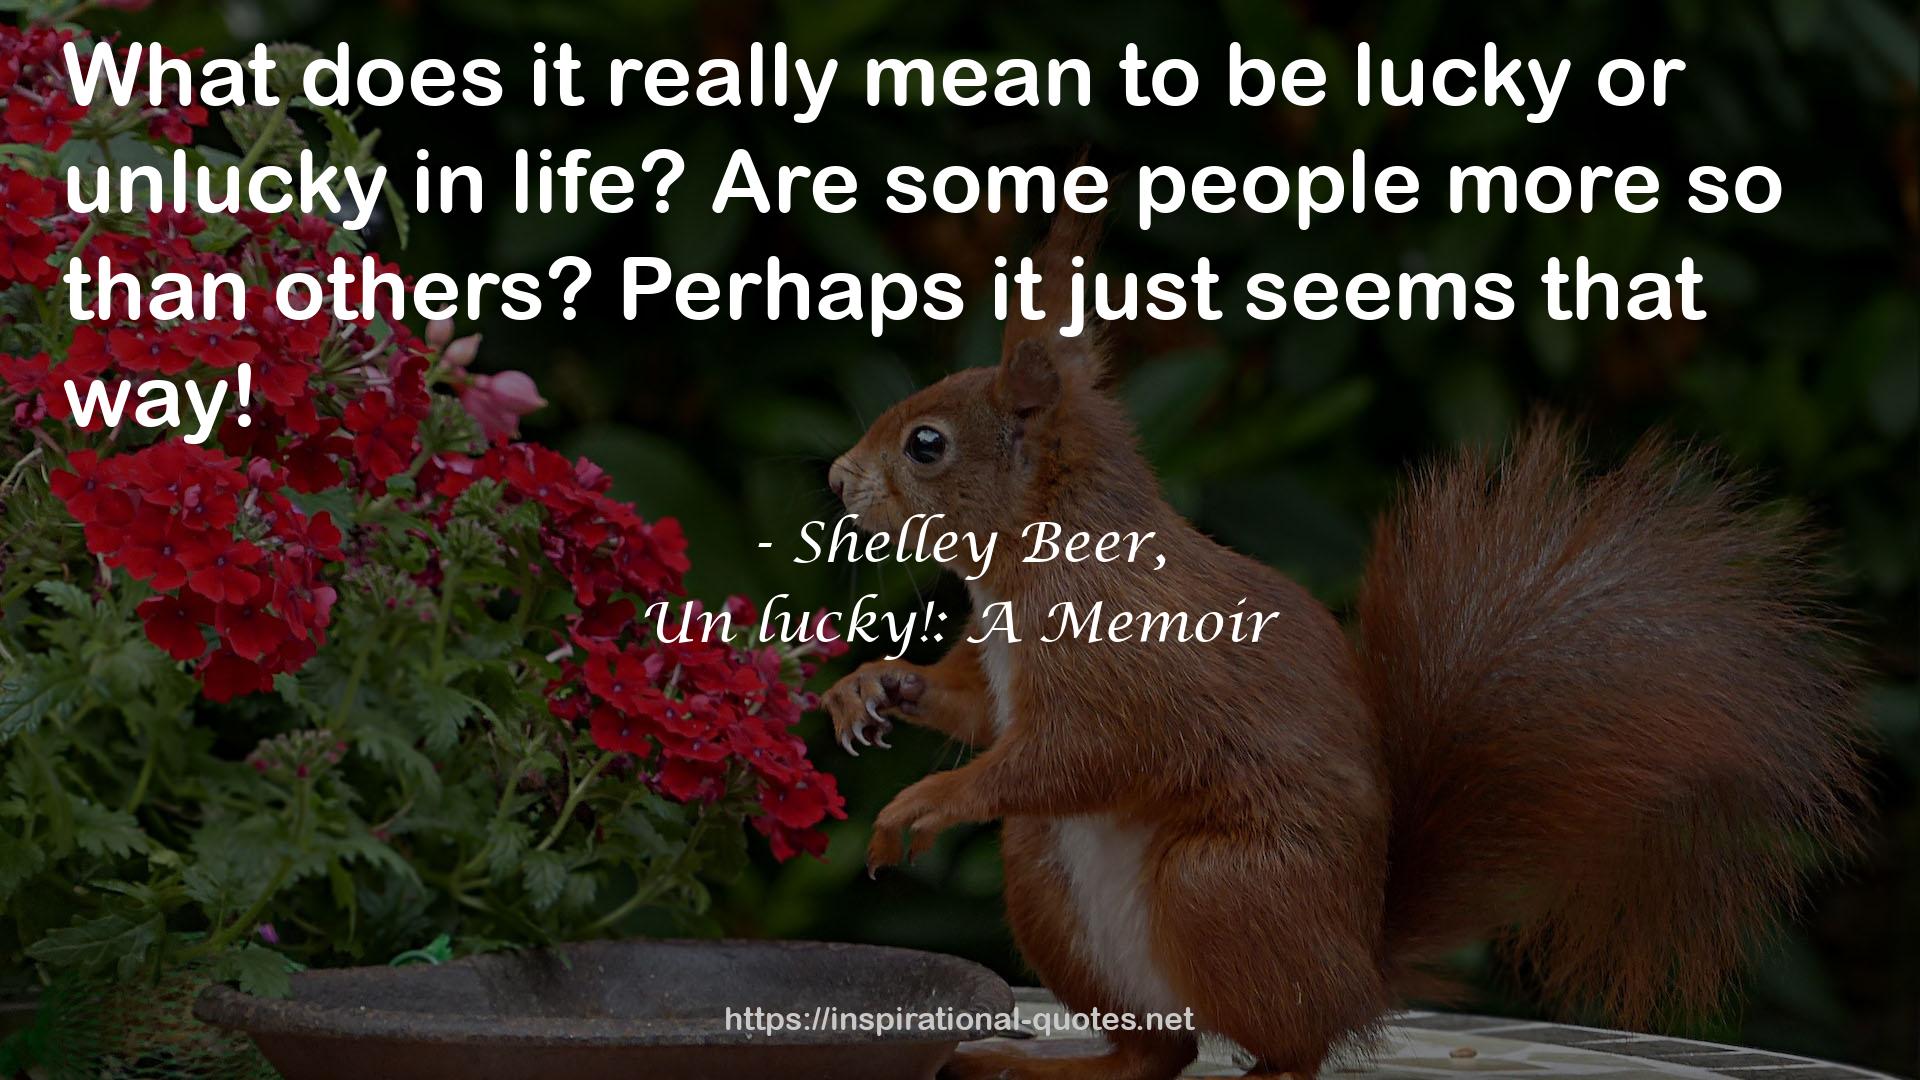 Shelley Beer, QUOTES